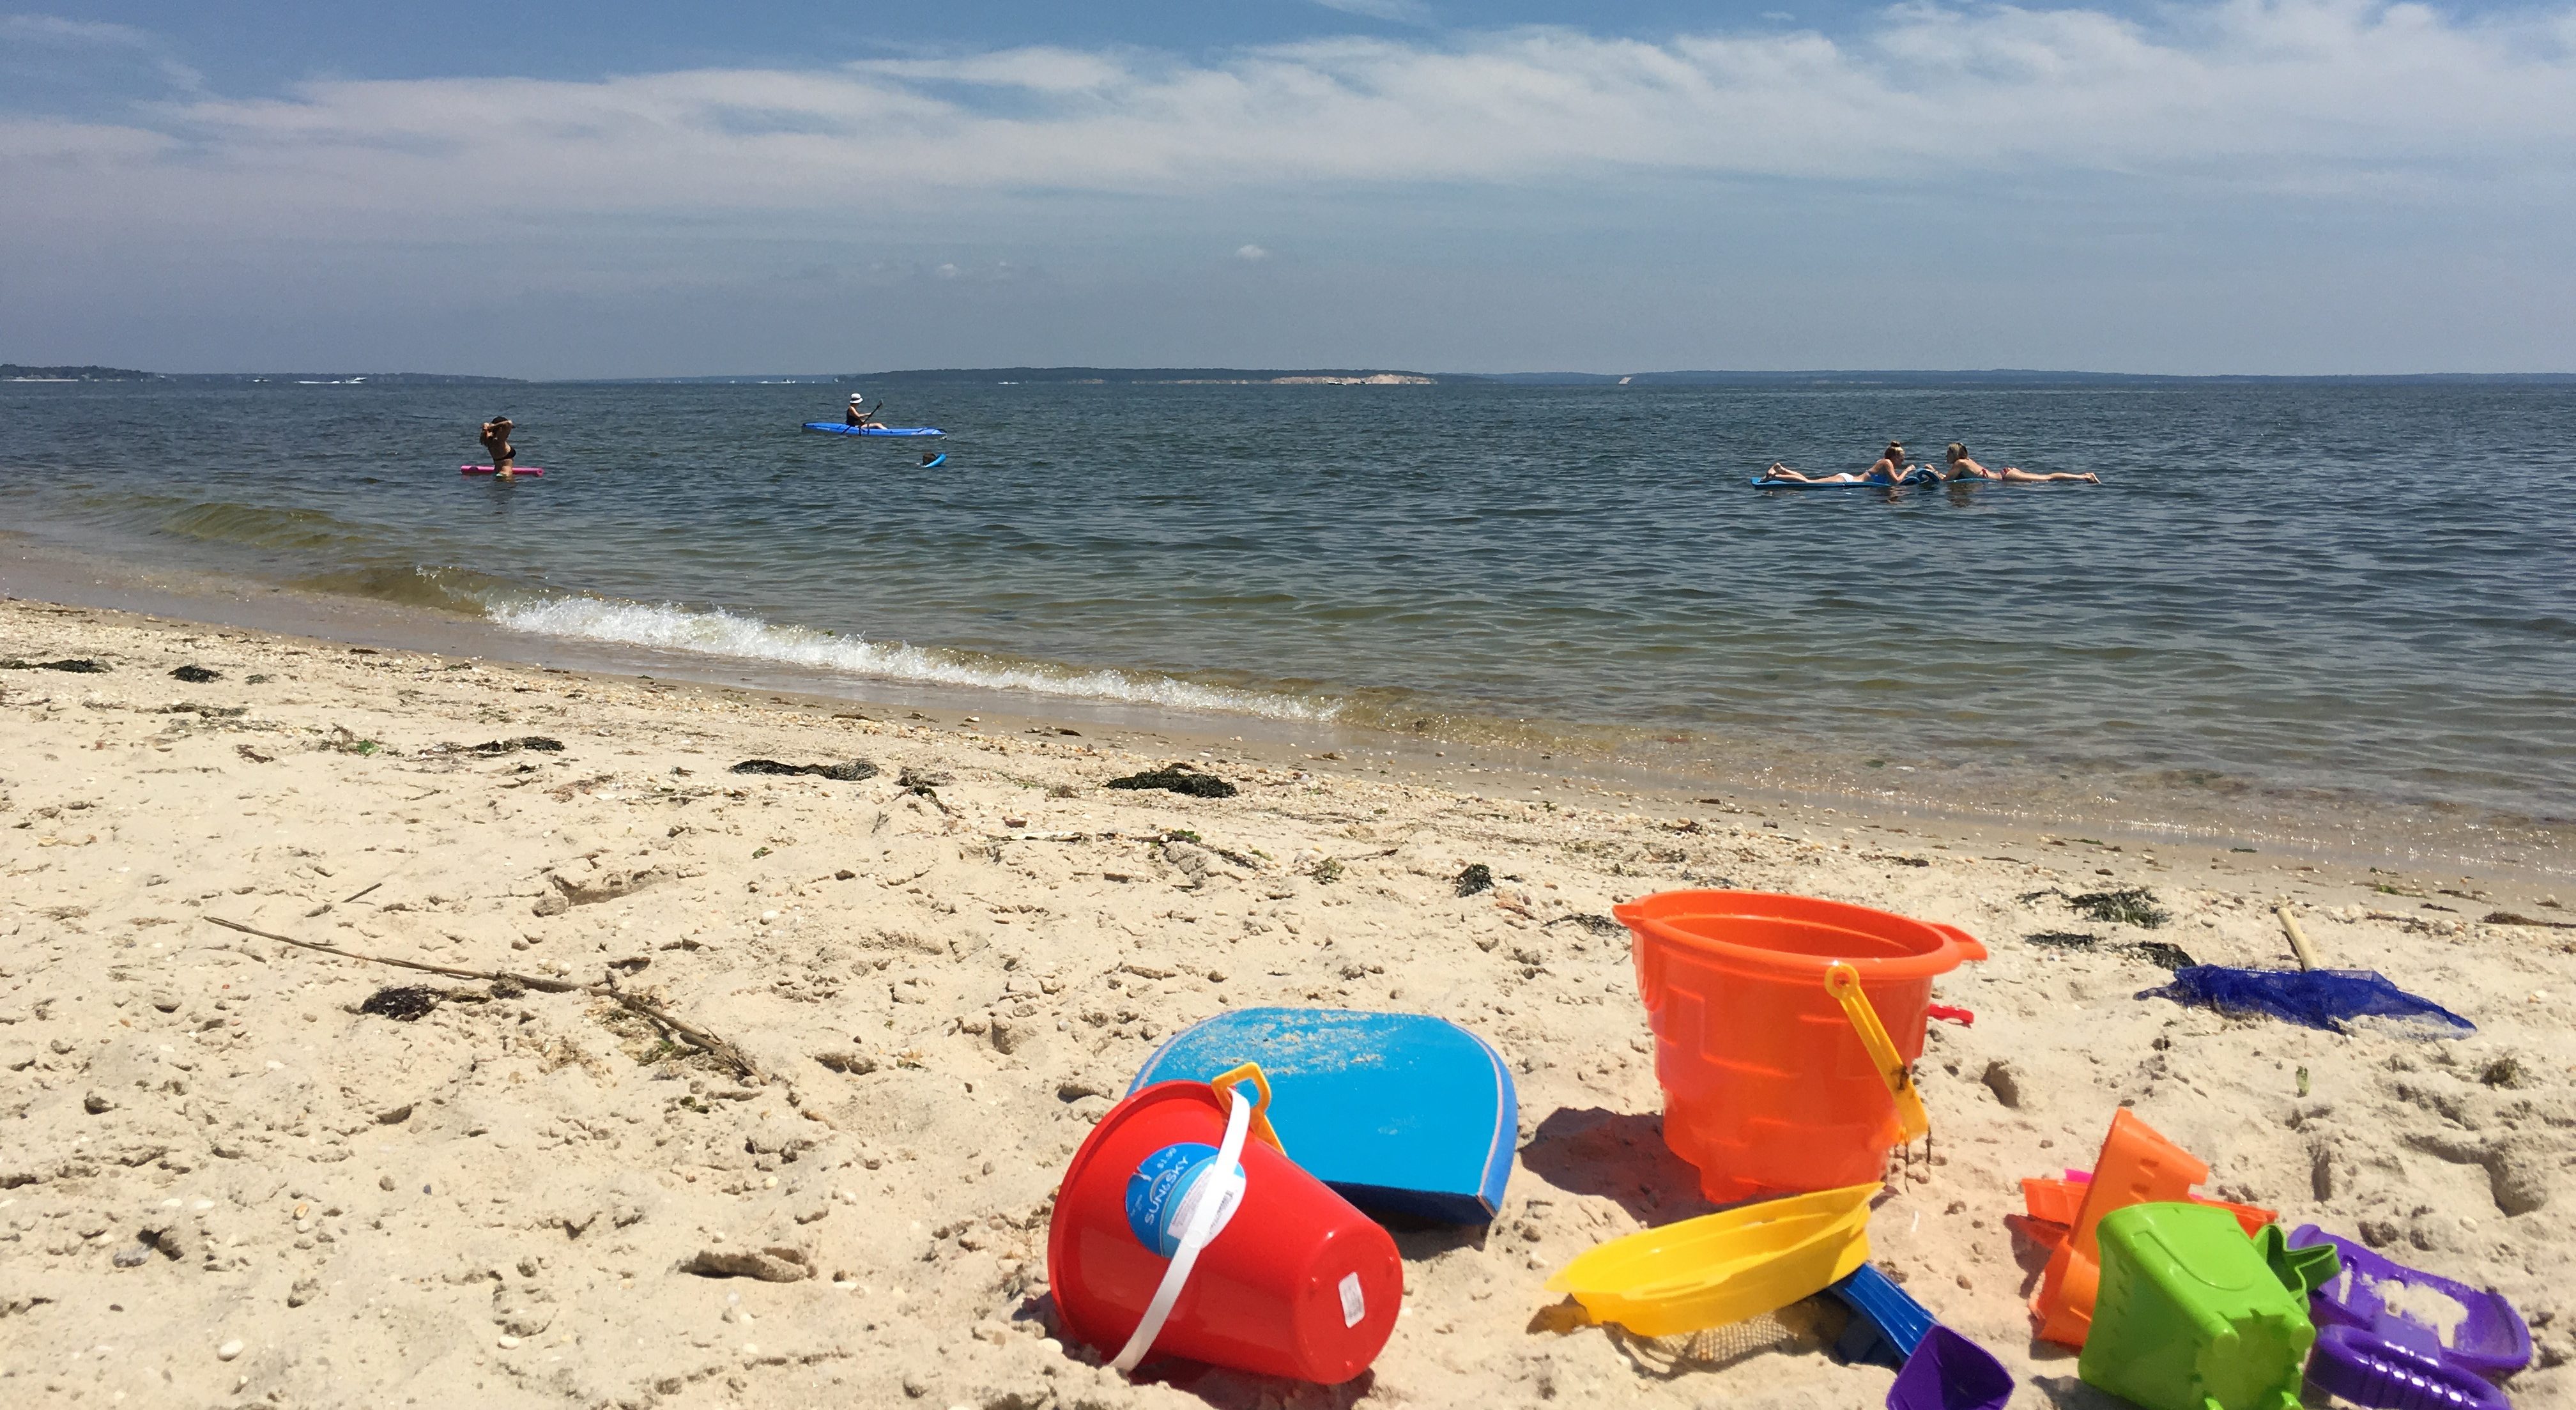 People enjoying the water and beach in the Peconic Estuary.